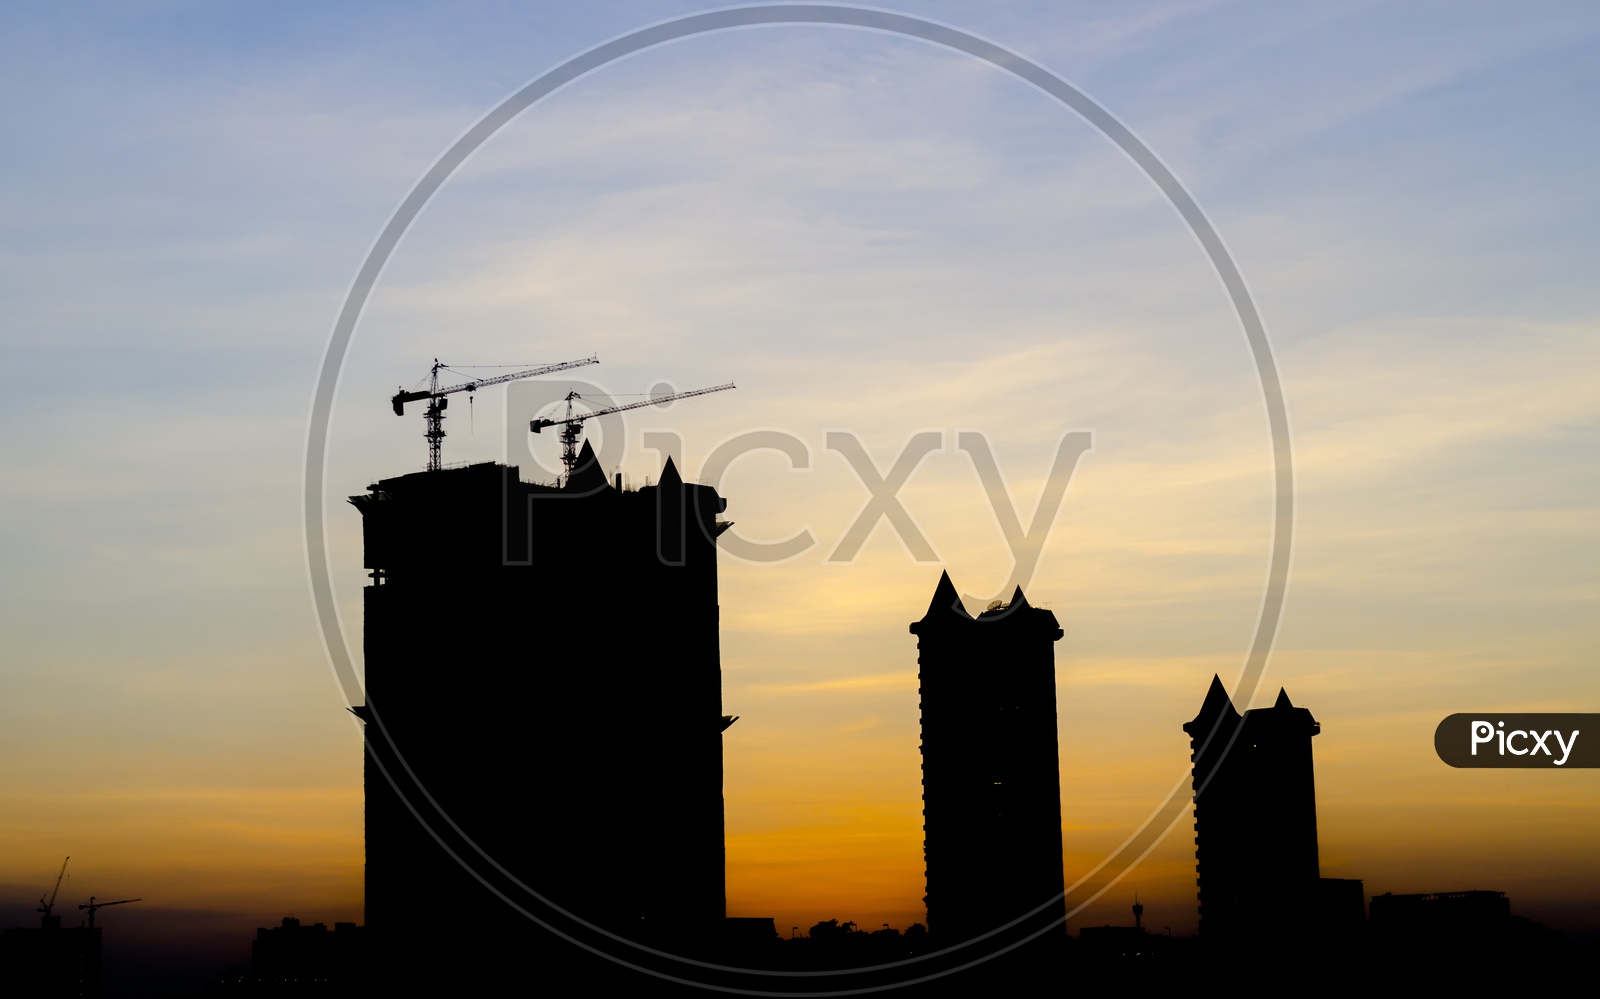 Construction project silhouette during sunset